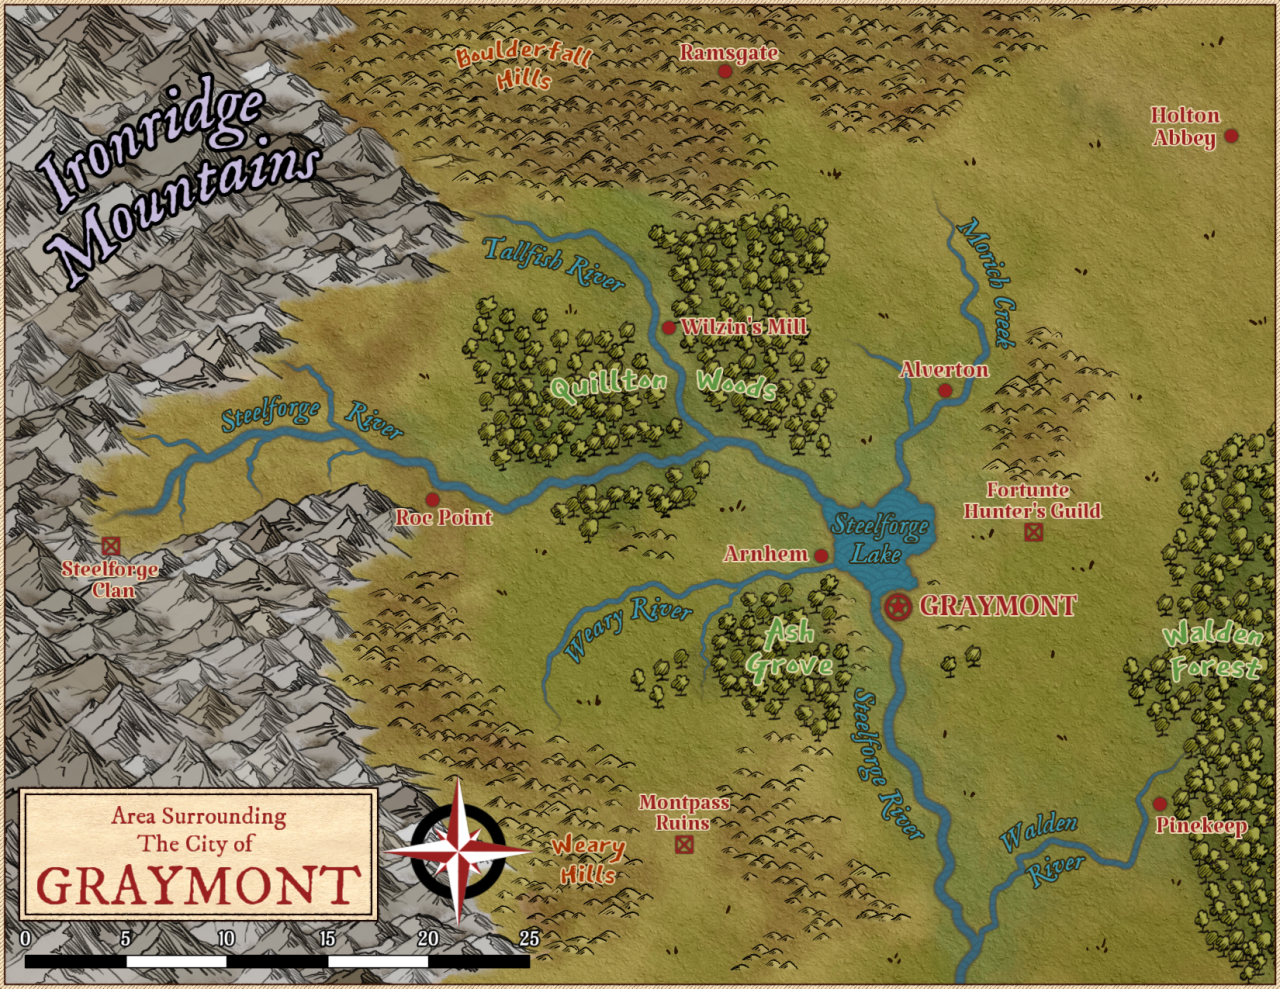 My latest map using Wonderdraft. This map is the starting region for a campaign I’m planning (hopefully playing it soon!) This region is home to the Steelforge Clan of Dwarves and steel refinement is the primary economic driving factor.